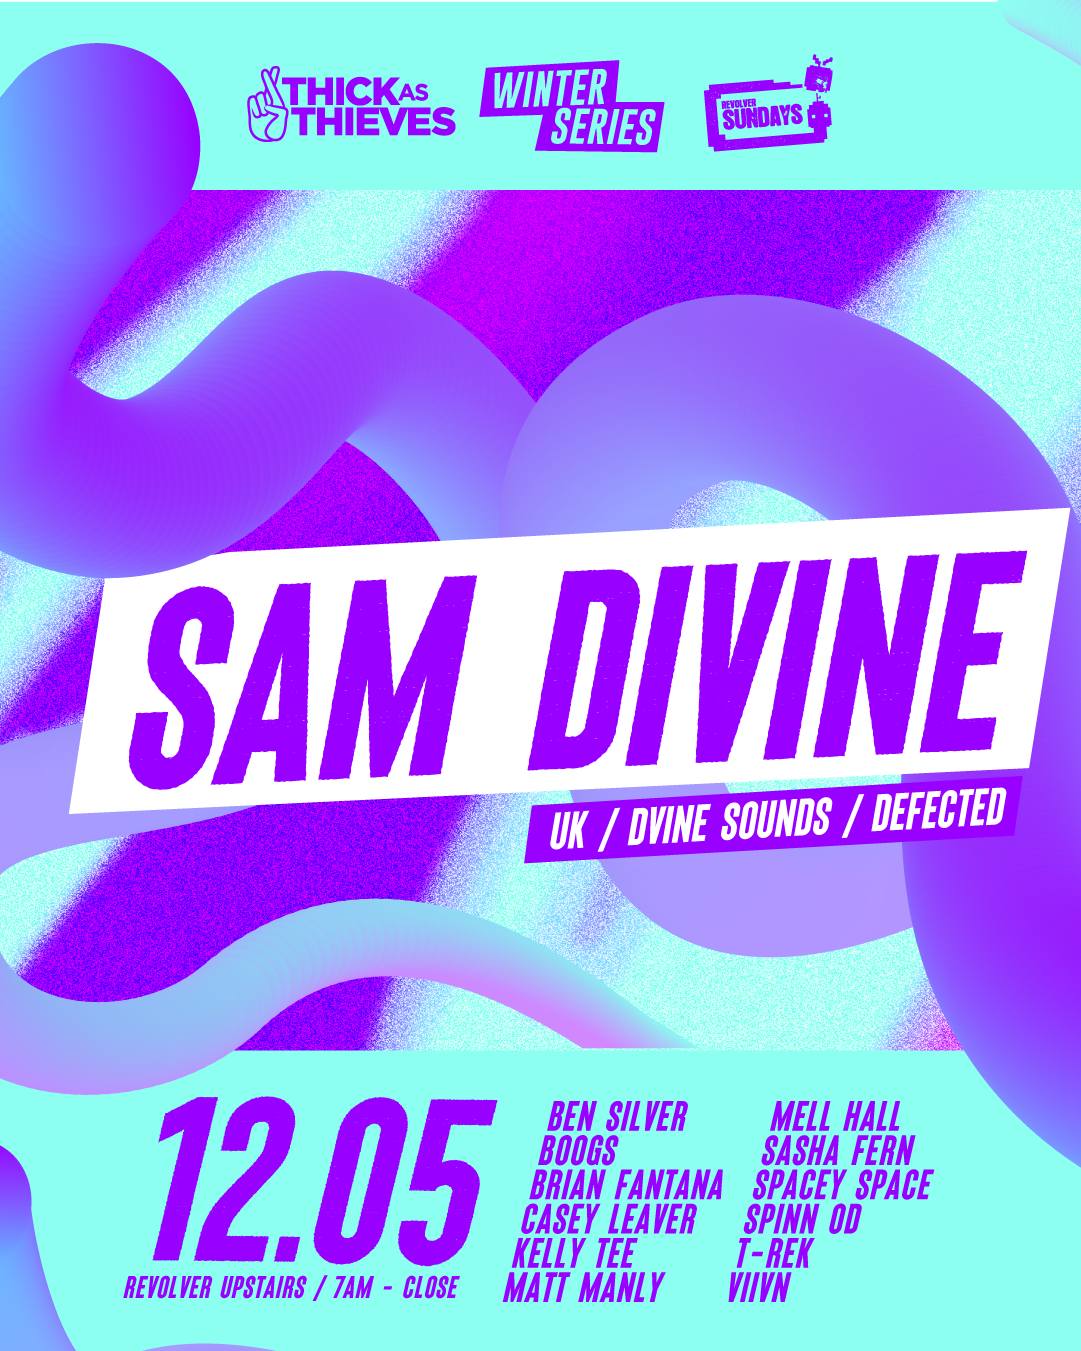 Thick As Thieves pres. Winter Series - Sam Divine - フライヤー表